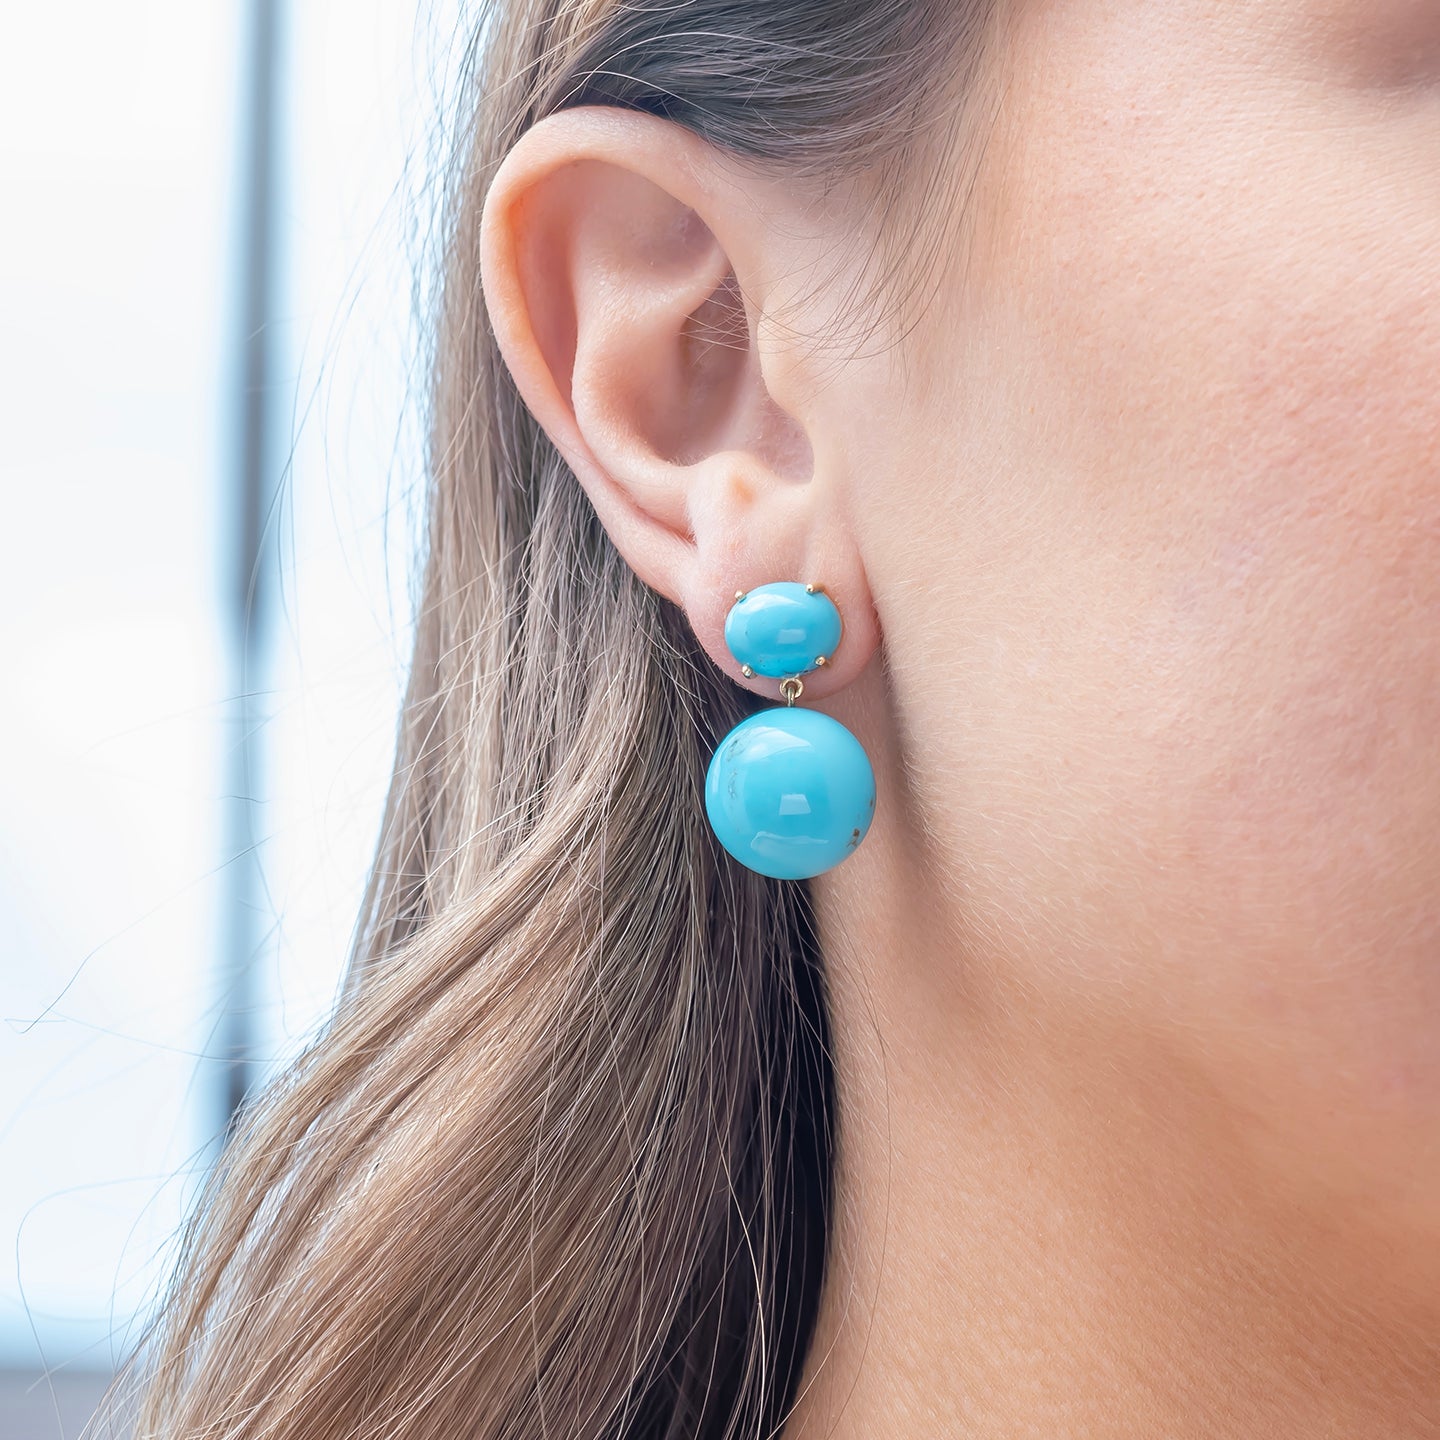 Irene Neuwirth 'Gumball' Post Earring Set with Oval and Sphere Shape Cabochon Kingman Turquoise